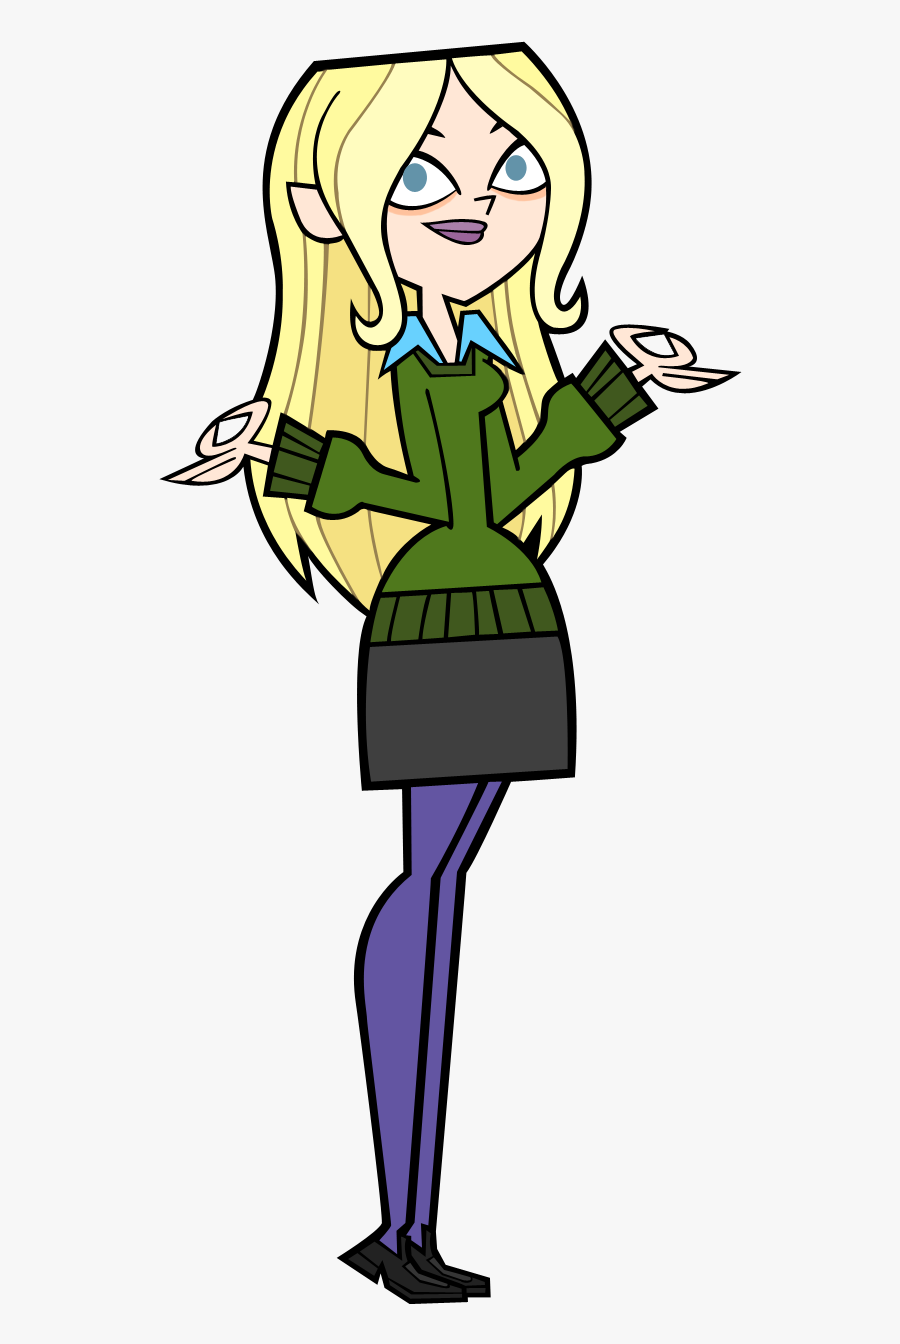 While Team 2 Is Now - Total Drama Characters Dawn, Transparent Clipart